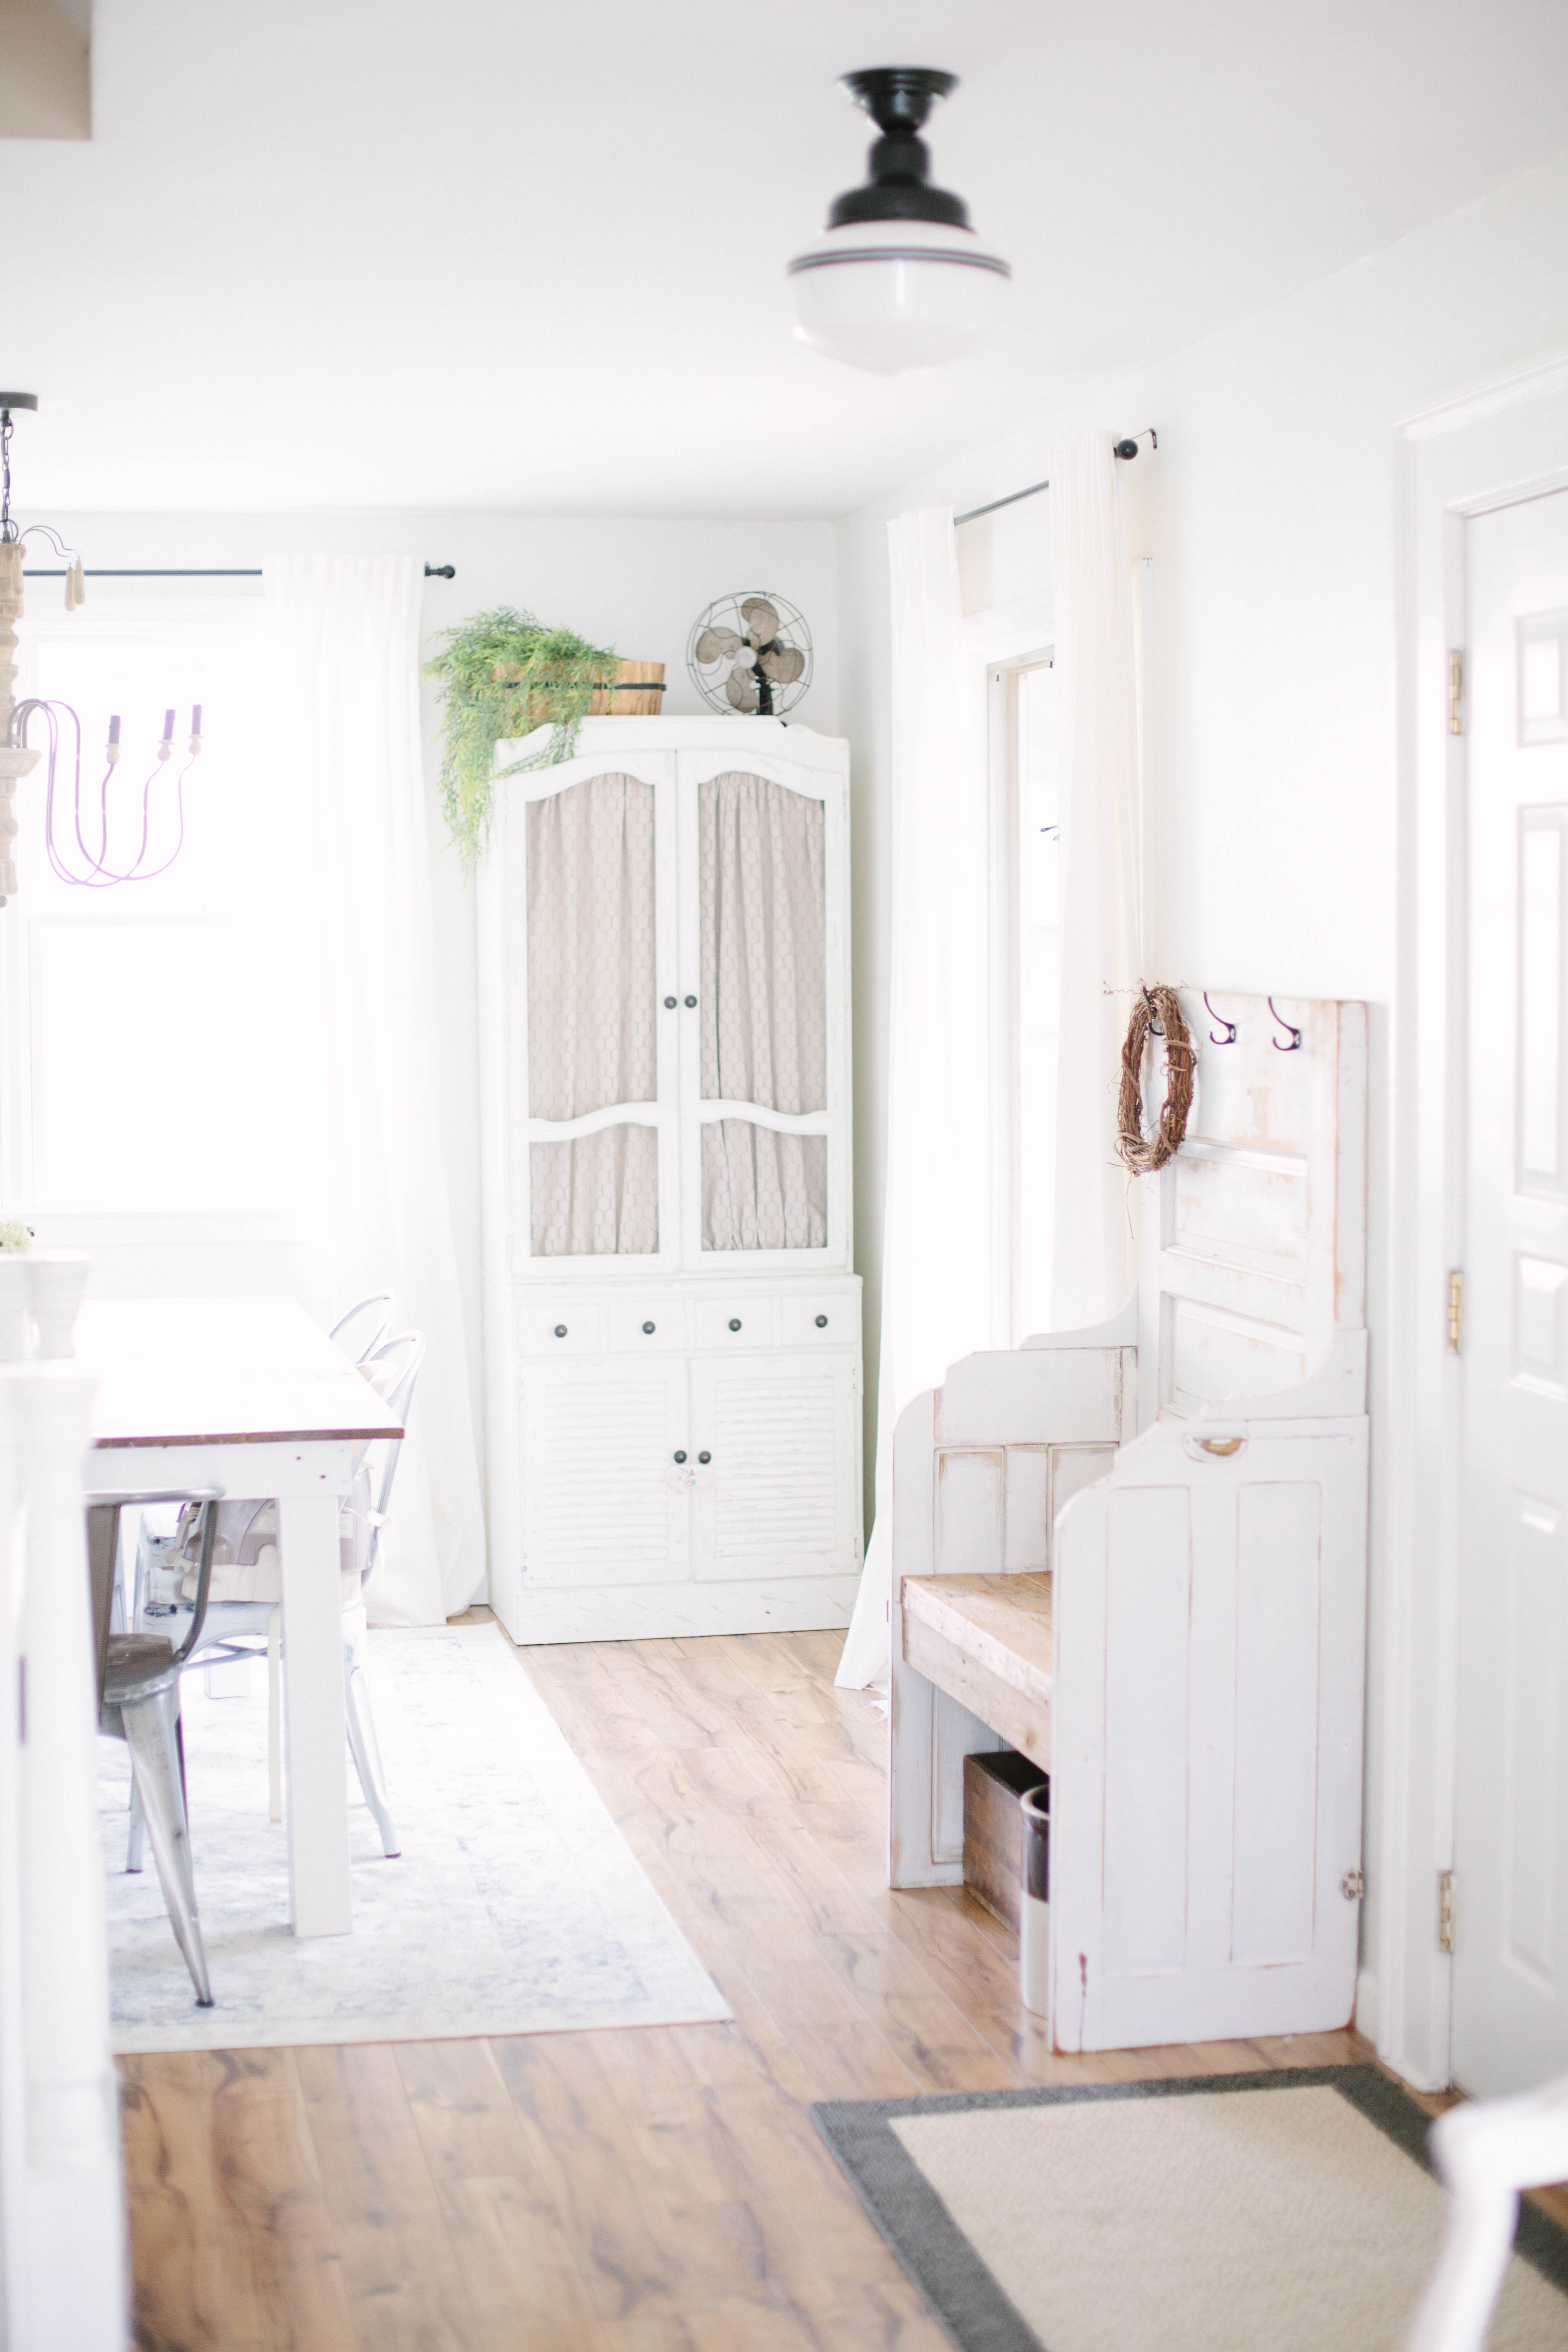 Four simple tips on How To Define Your Foyer Space that are easy inexpensive. Whether your foyer is large or small, these tips will offer a high impact!